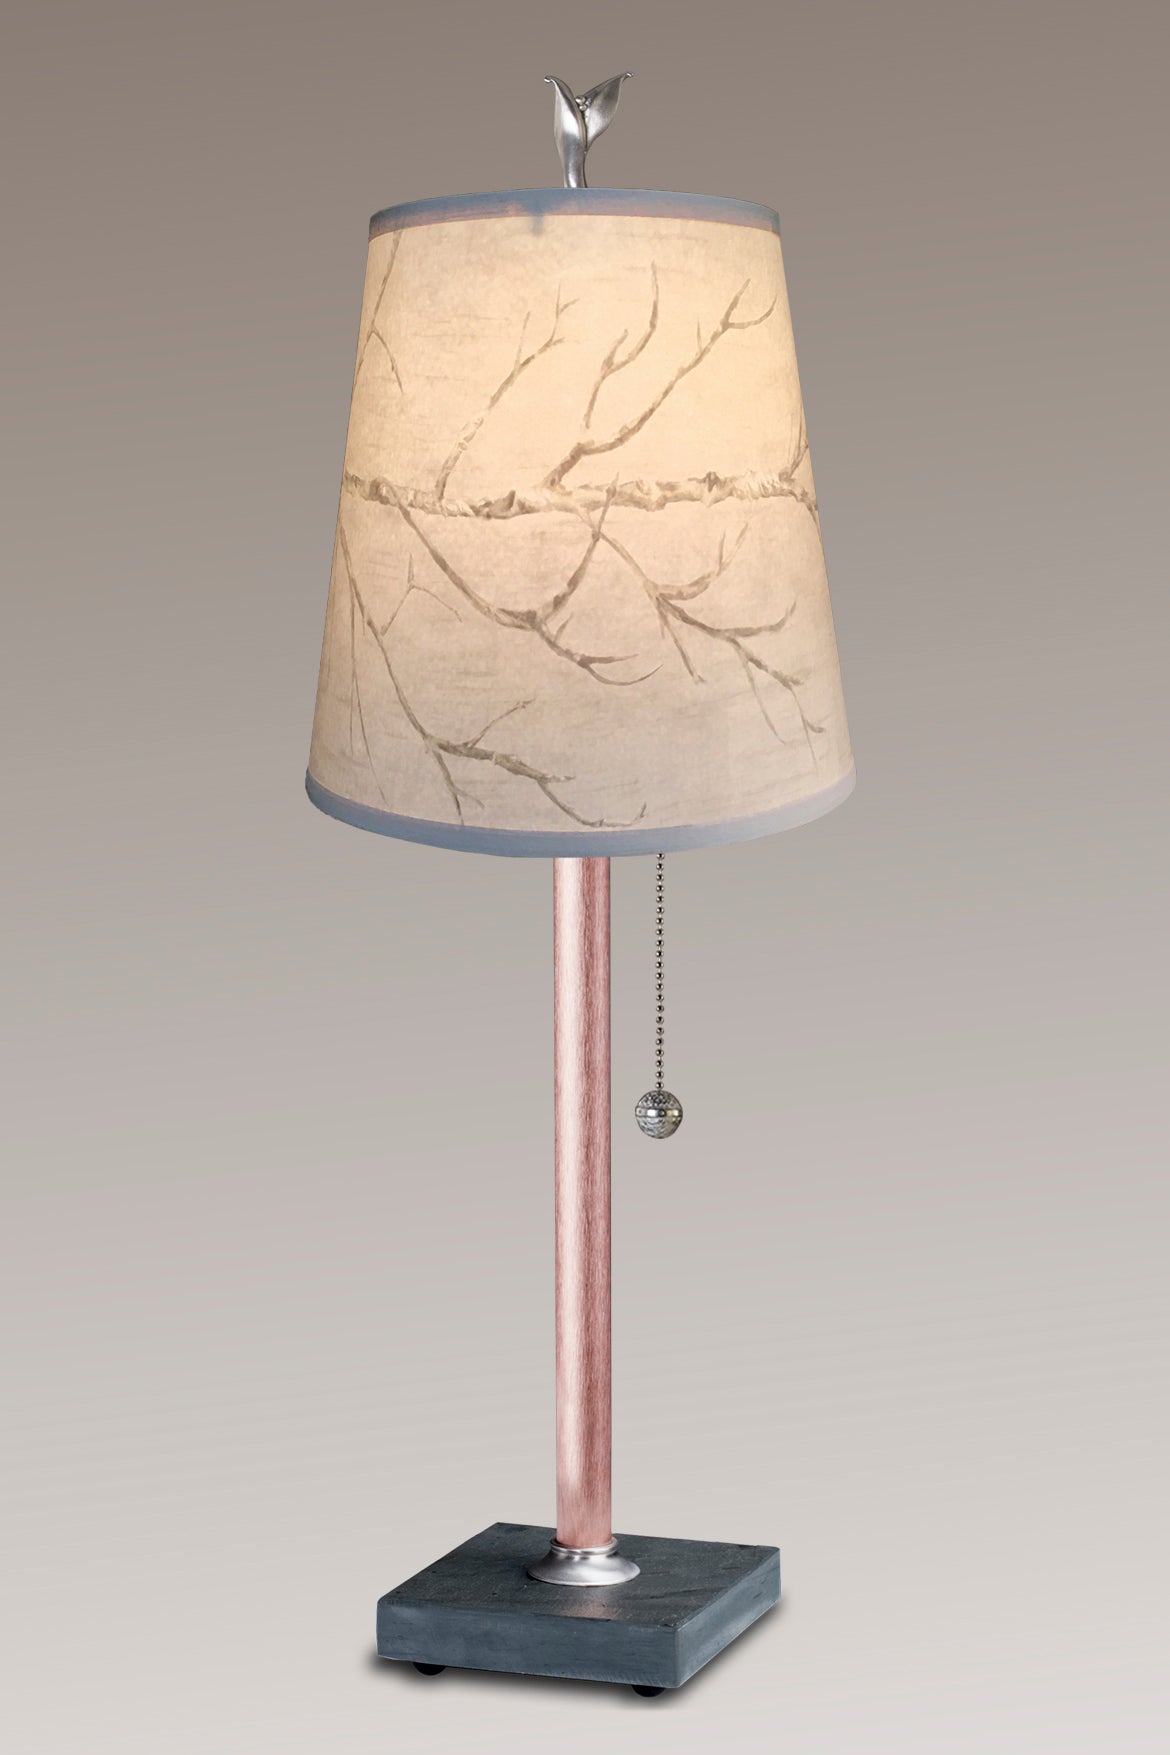 Copper Table Lamp with Small Drum Shade in Sweeping Branch